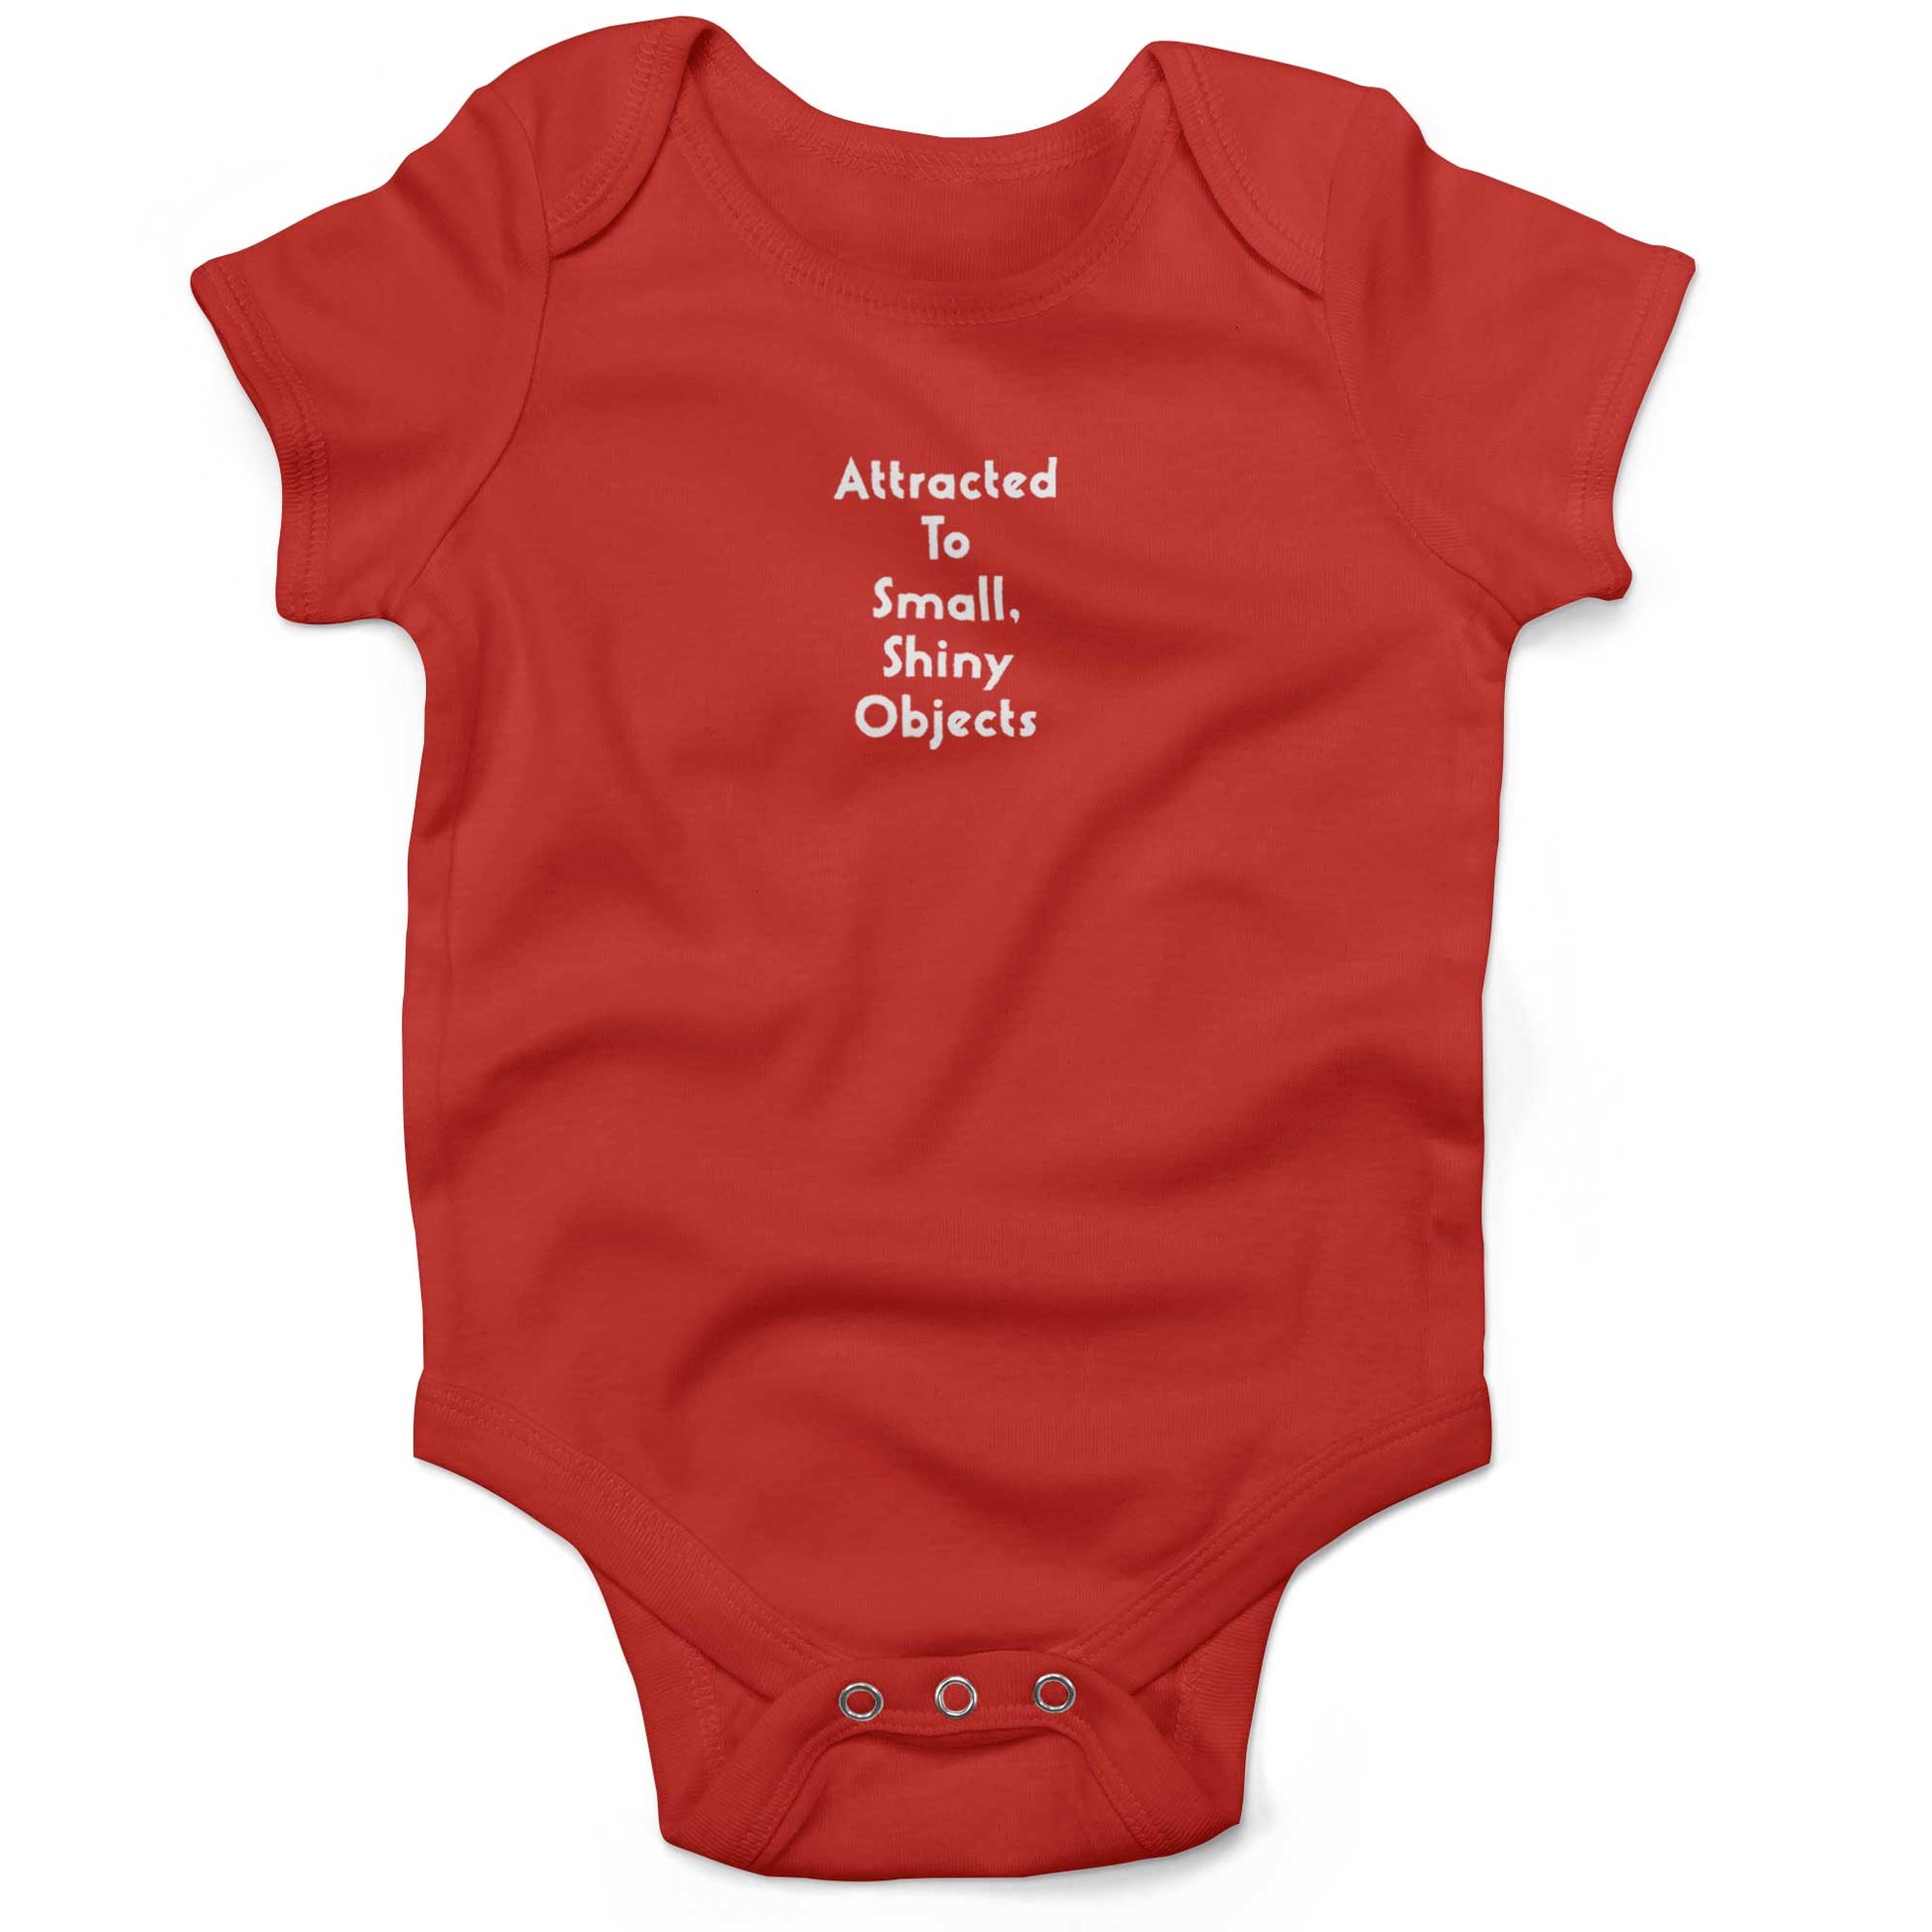 Attracted To Small, Shiny Objects Baby One Piece-Organic Red-3-6 months